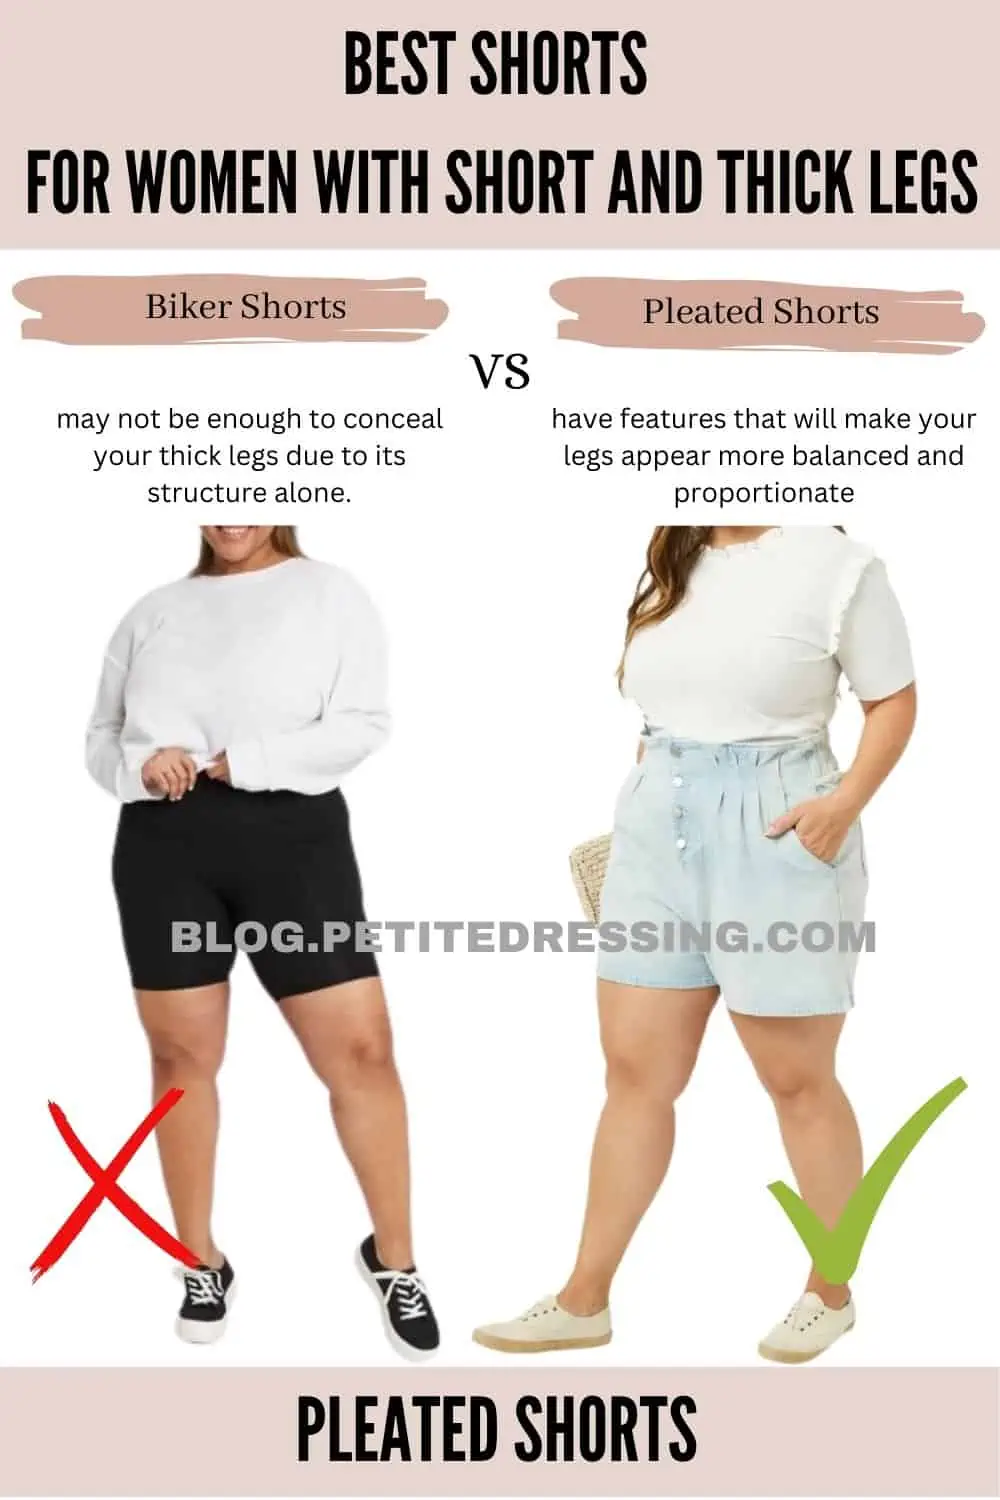 Shorts Style Guide for Women with Short and Thick Legs - Petite Dressing